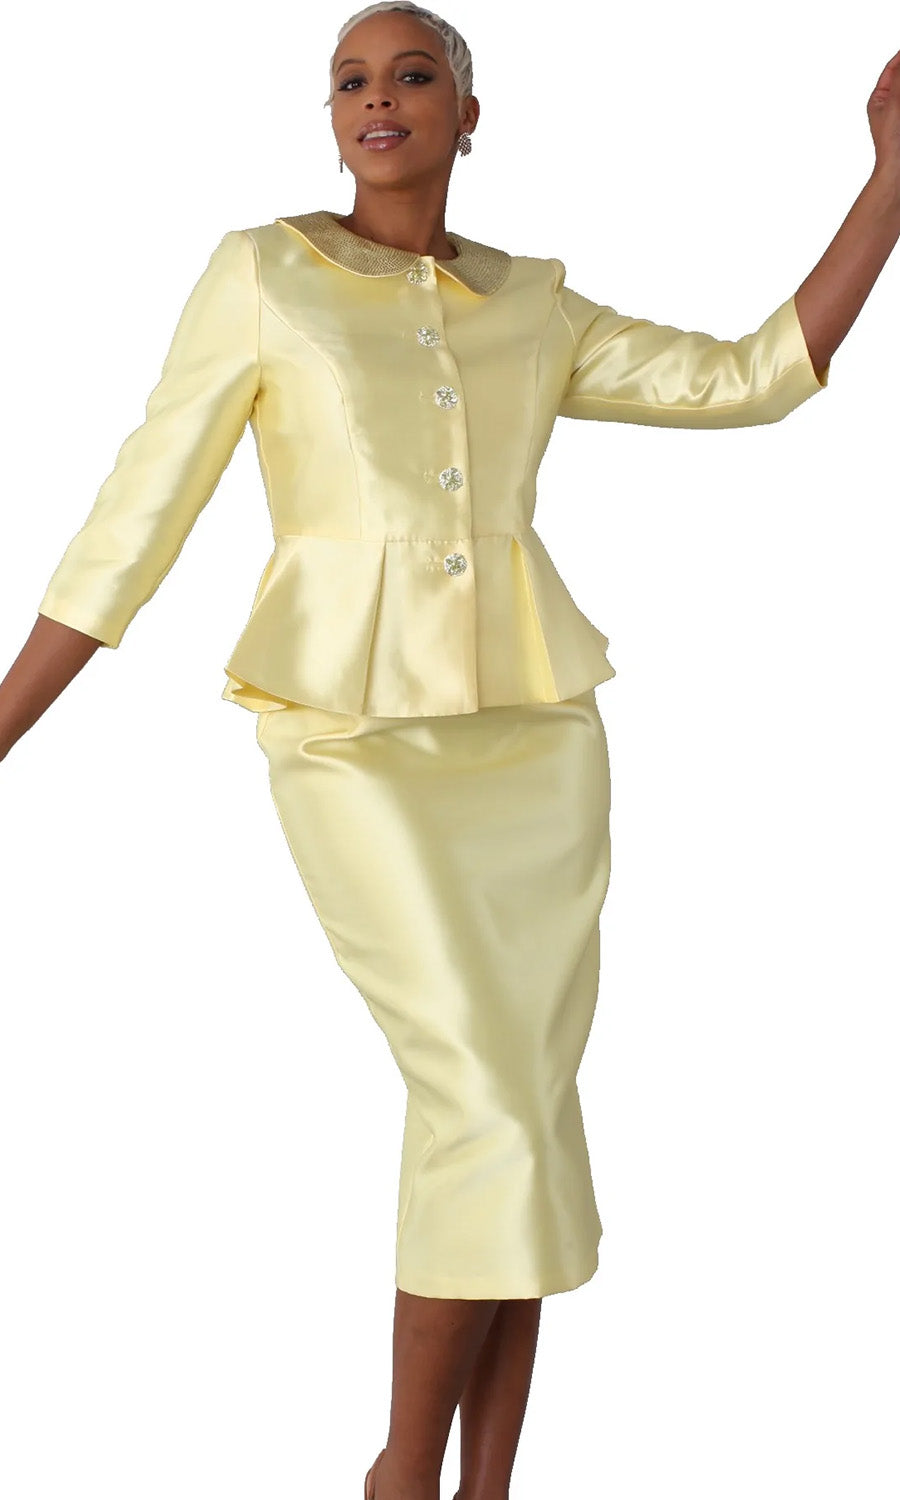 Tally Taylor Church Suit 4811C-Yellow - Church Suits For Less